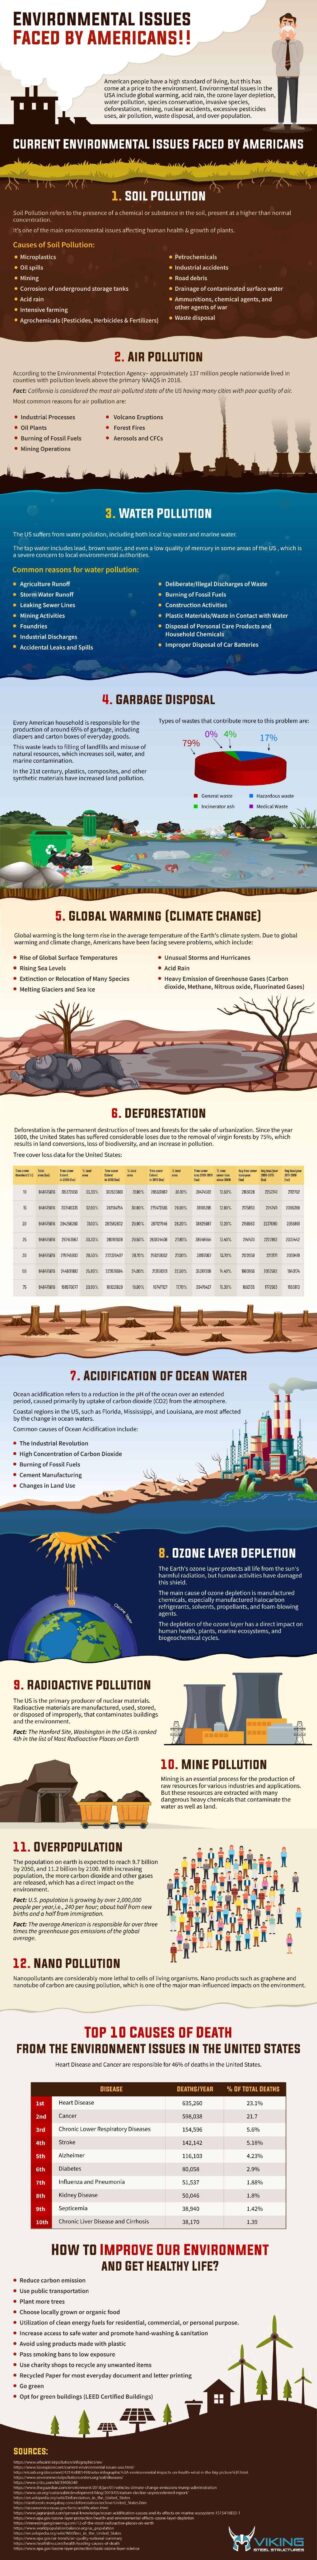 255 best Social Issues | Environment | Science Infographics images on Pinterest | Environment ...